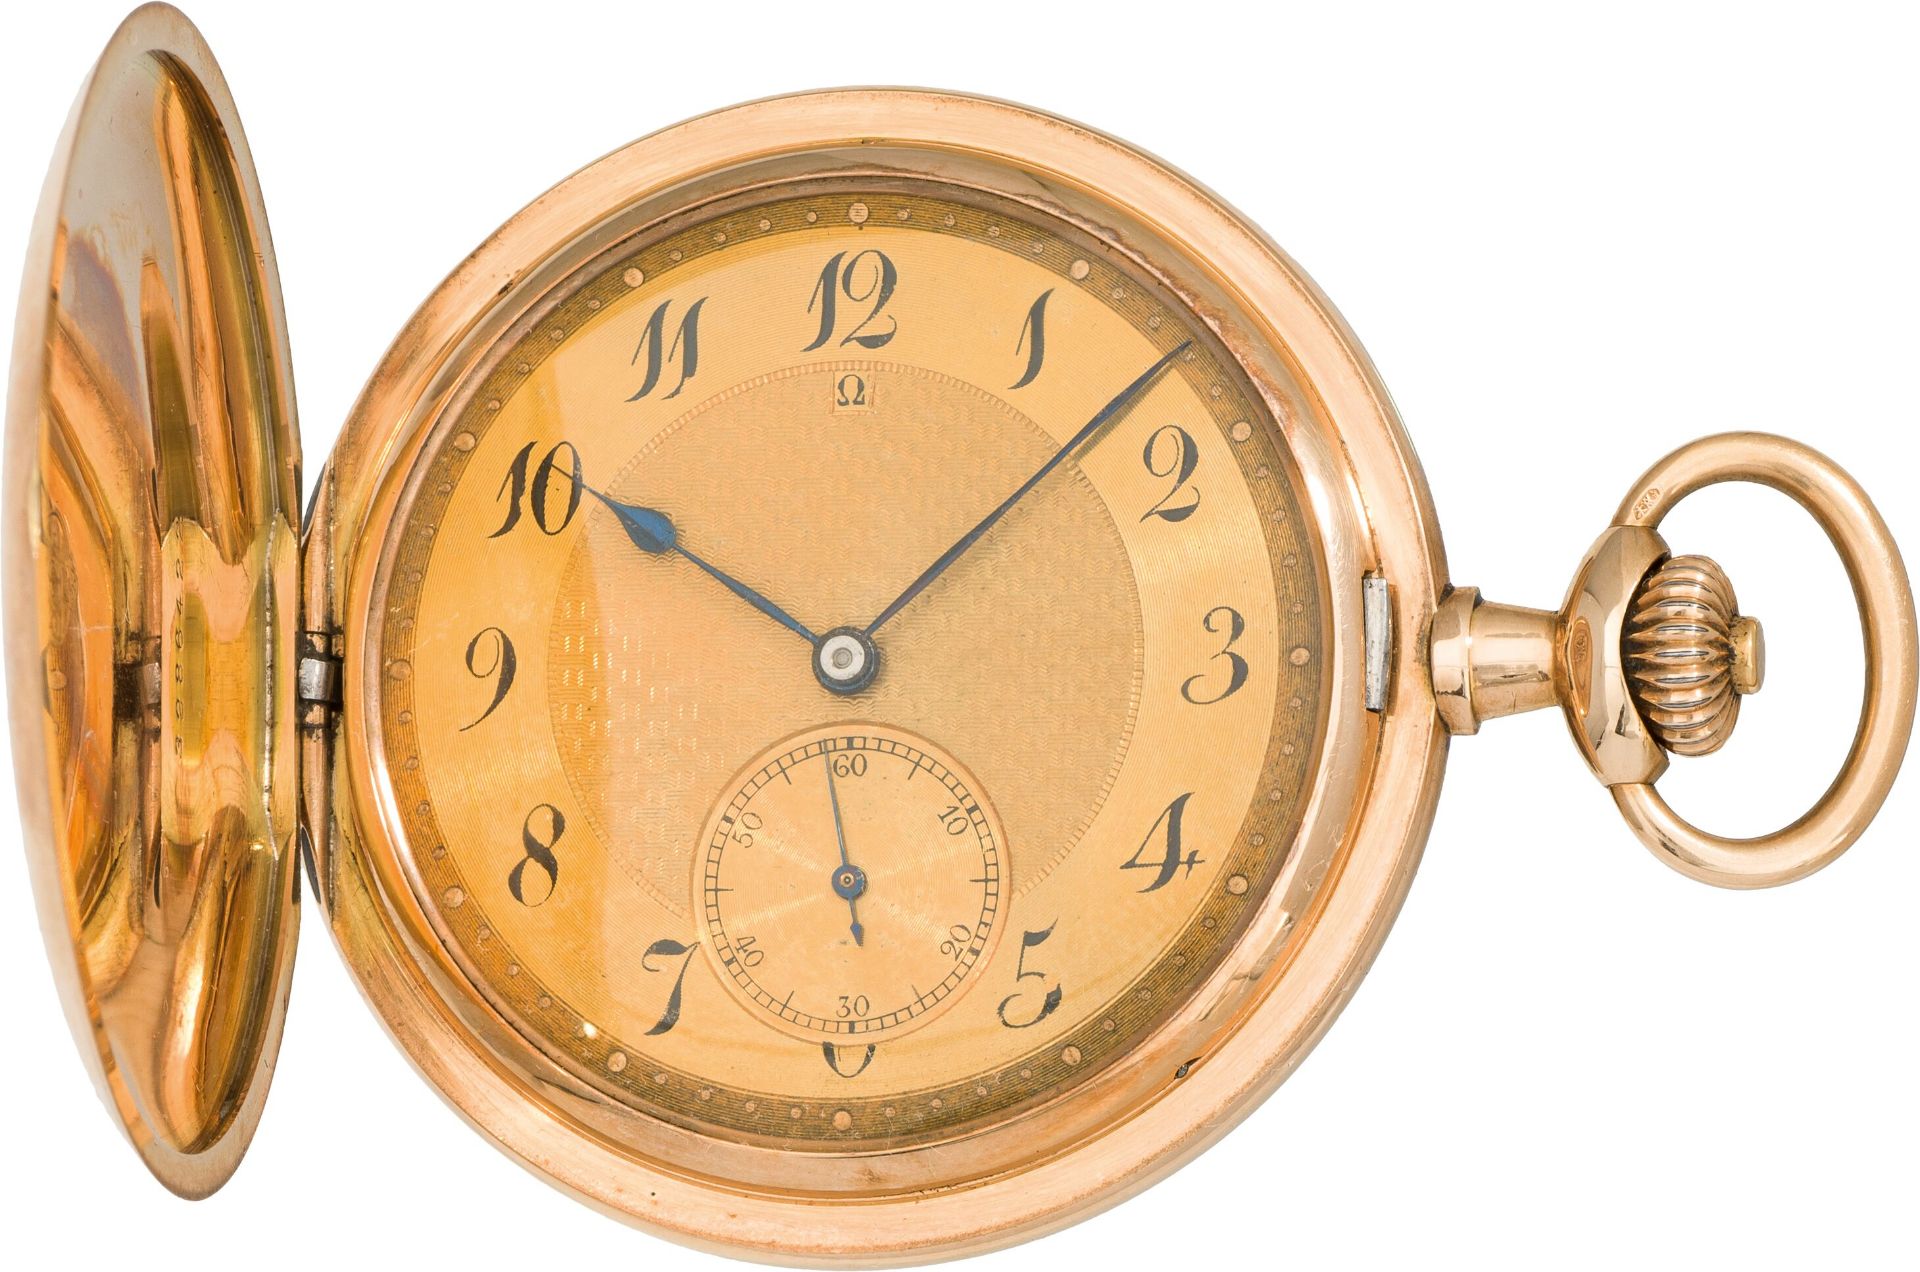 OmegaPocket watchSwitzerland, early 20th centuryprobably 14k gold;crown winding mechanism, moss